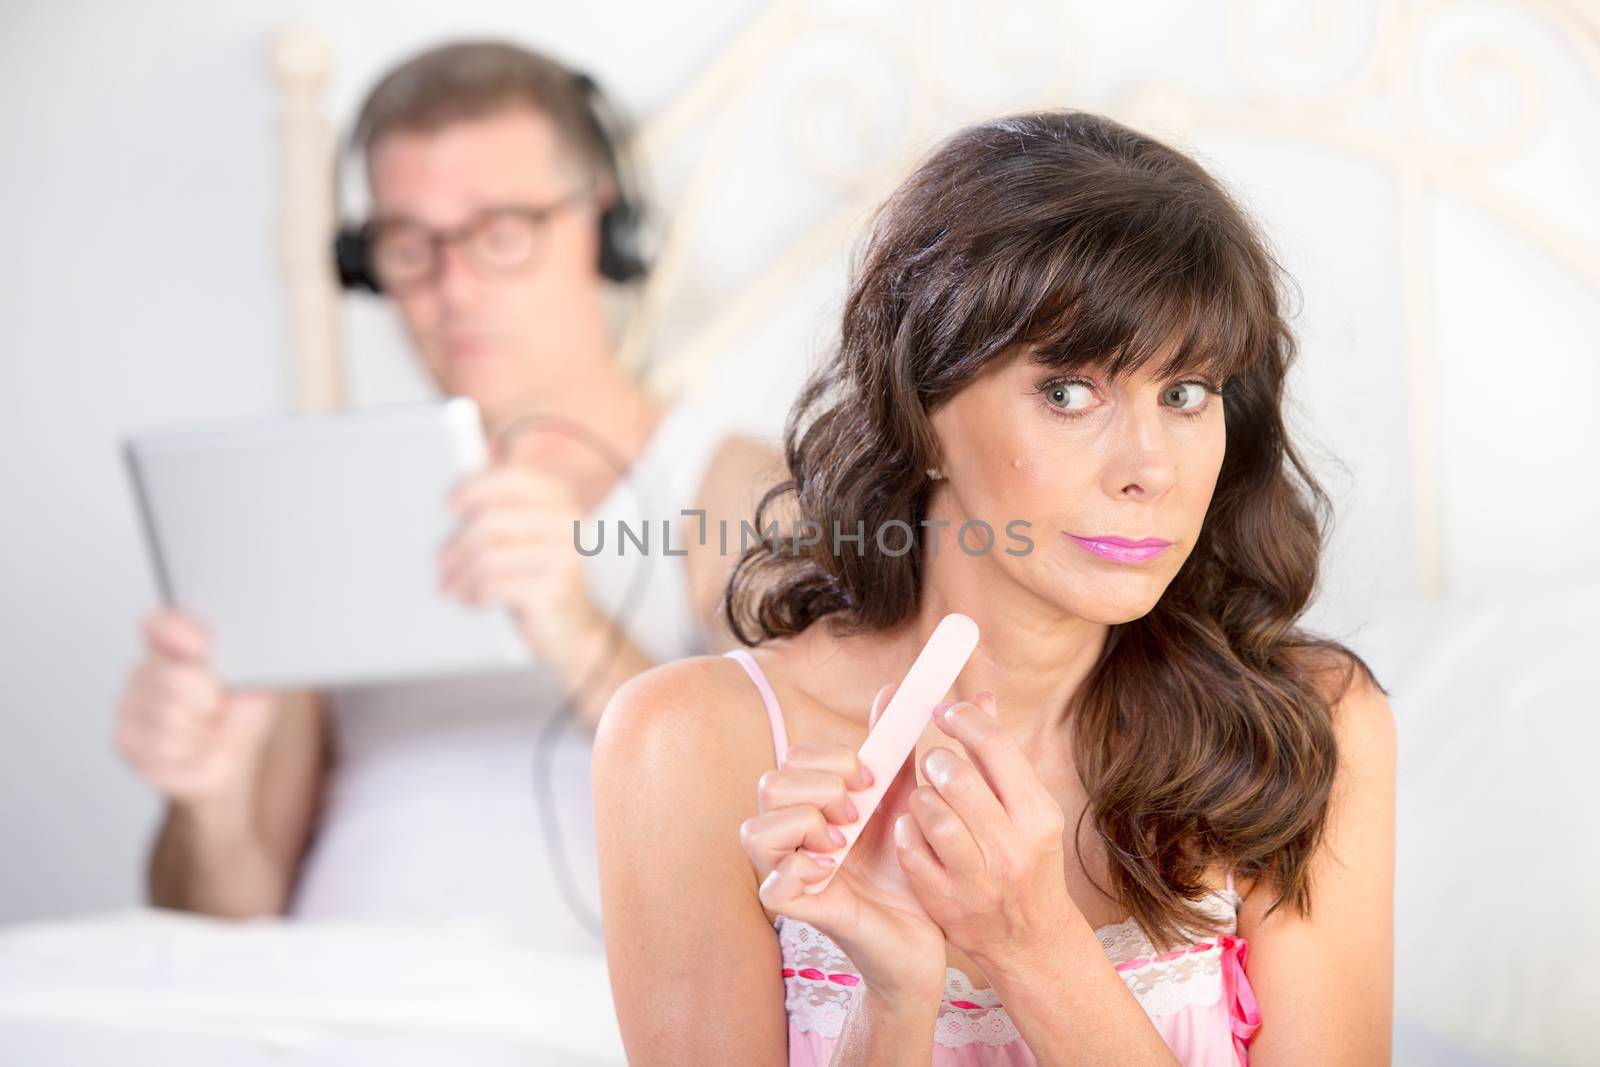 Bored woman and distracted man using tablet computer with headphones in bedroom